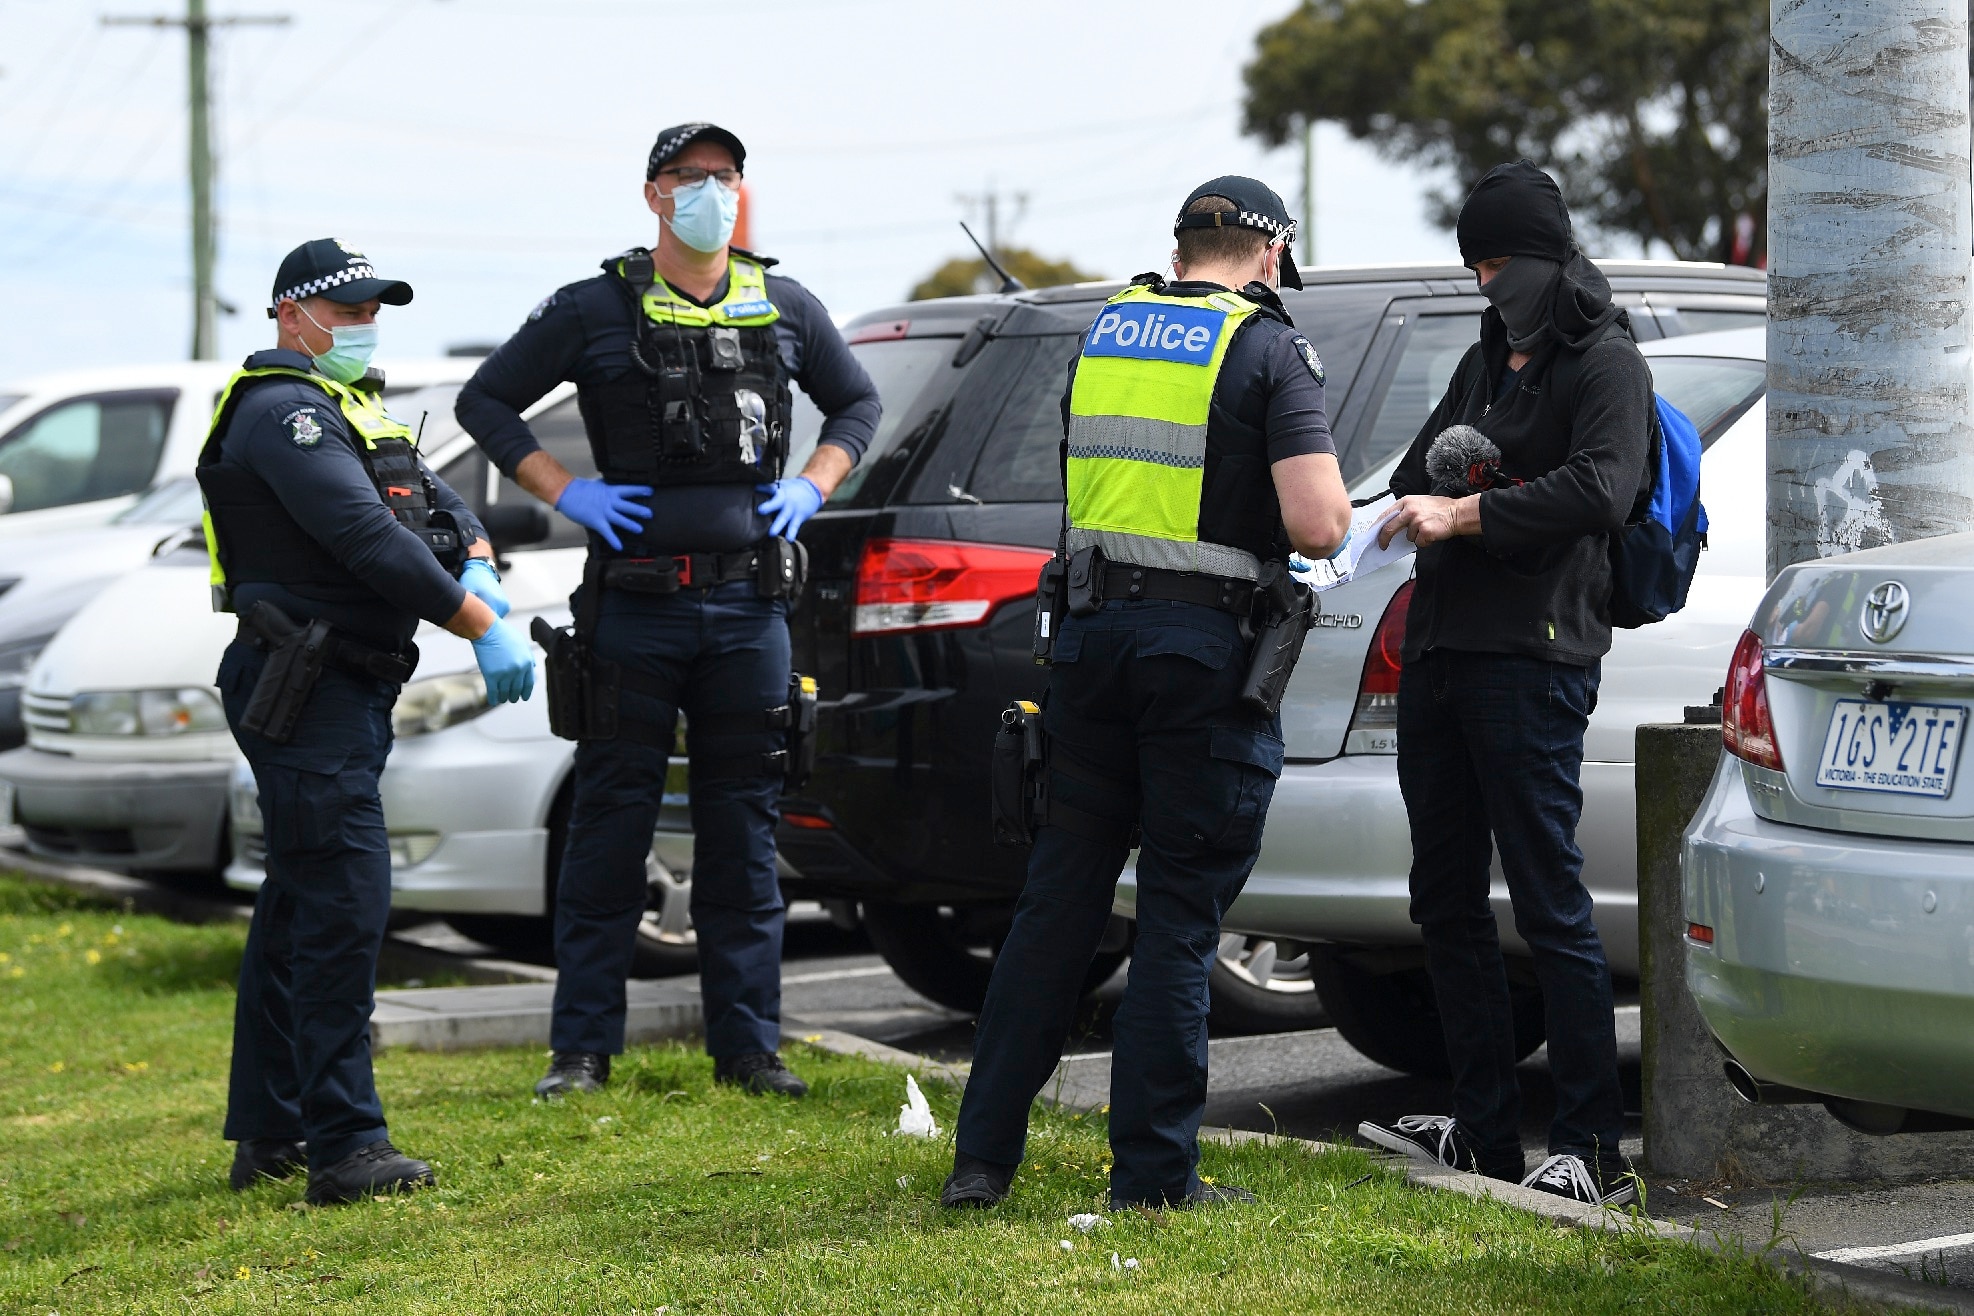 Victorian police speak to protesters at a rally near Campbellfield Plaza in Melbourne.